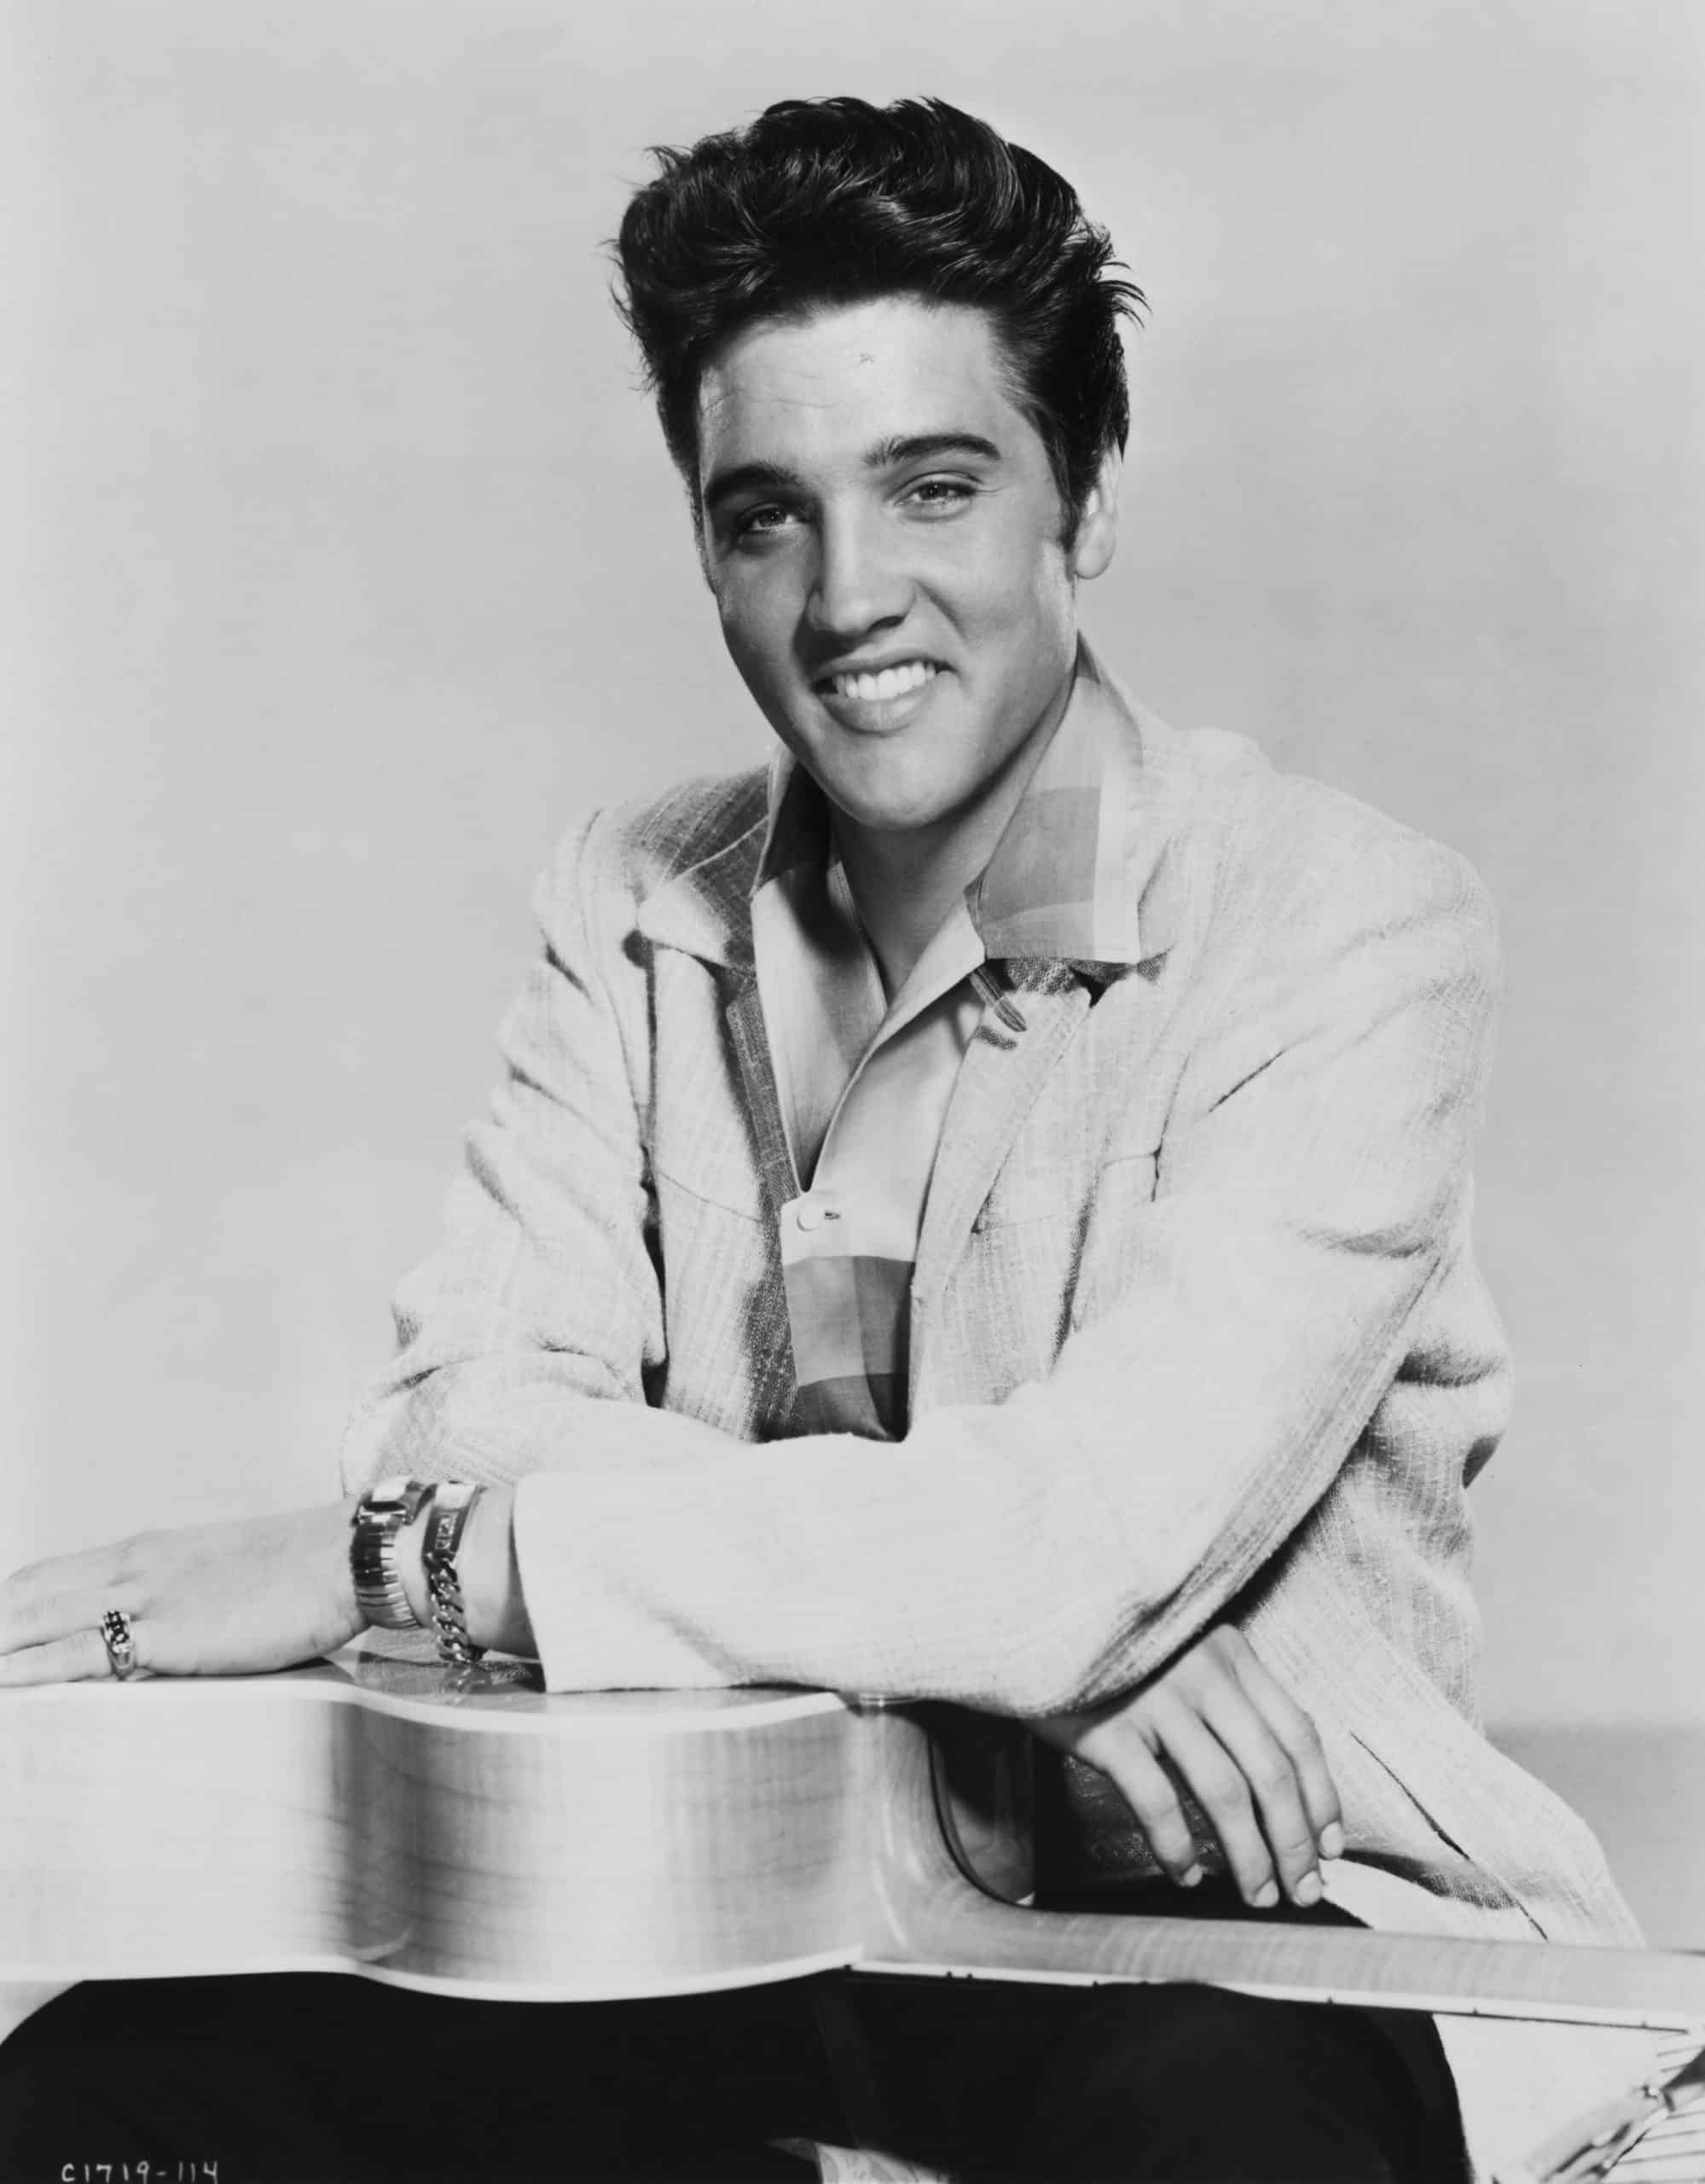 "The King of Rock and Roll" Elvis Presley is in the Rock & Roll Hall of Fame